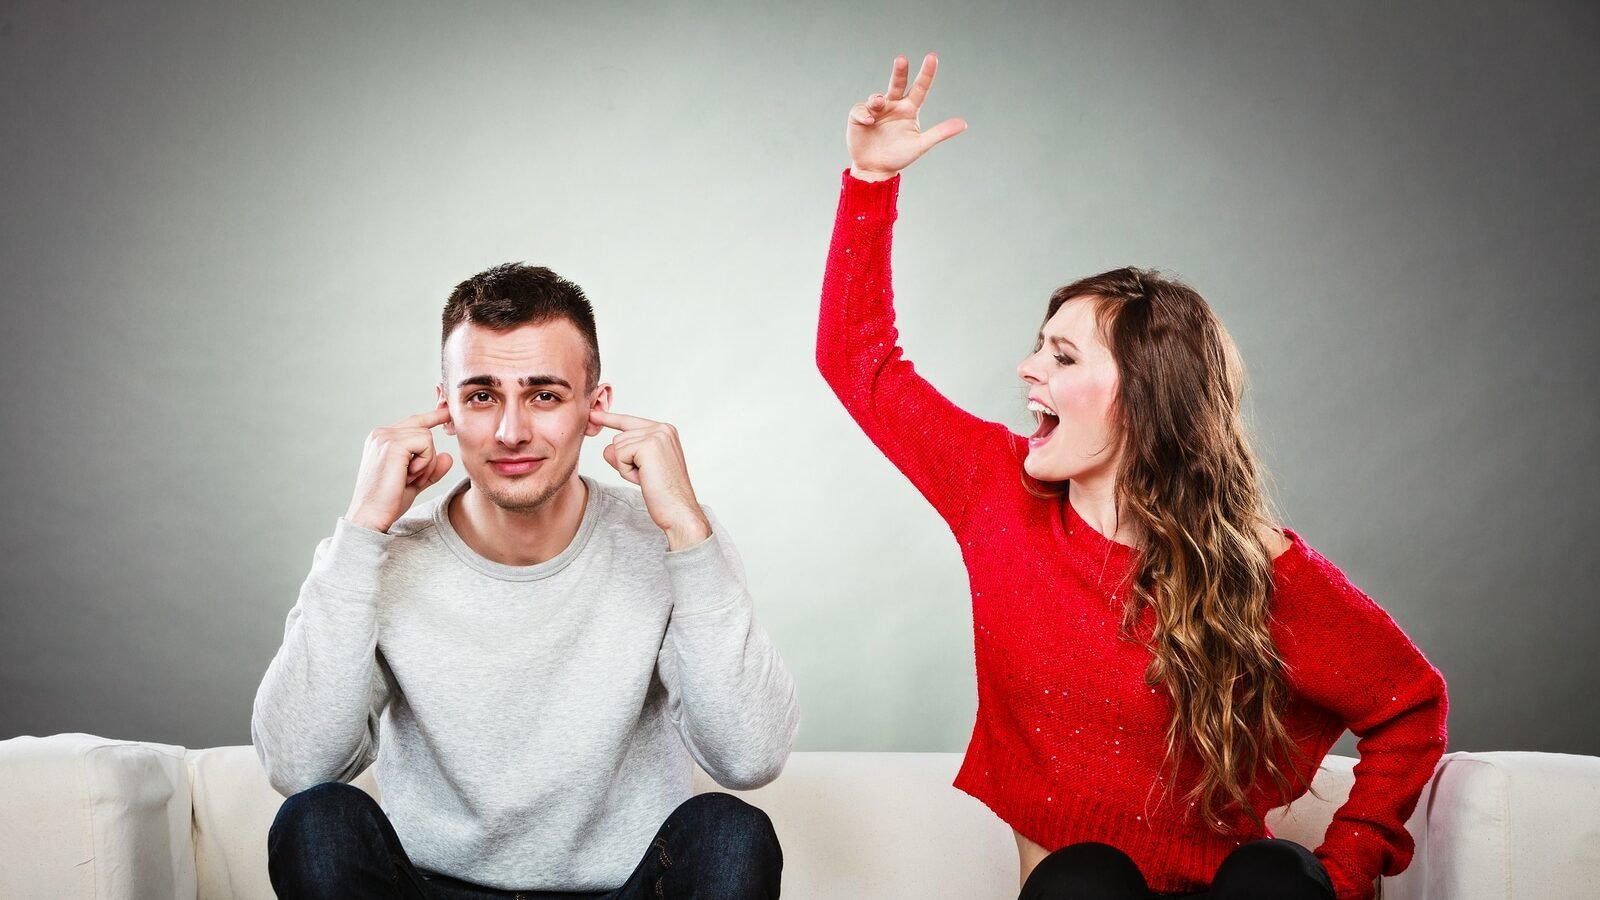 couple having argument - conflict bad relationships. Angry fury woman screaming man closes his ears.